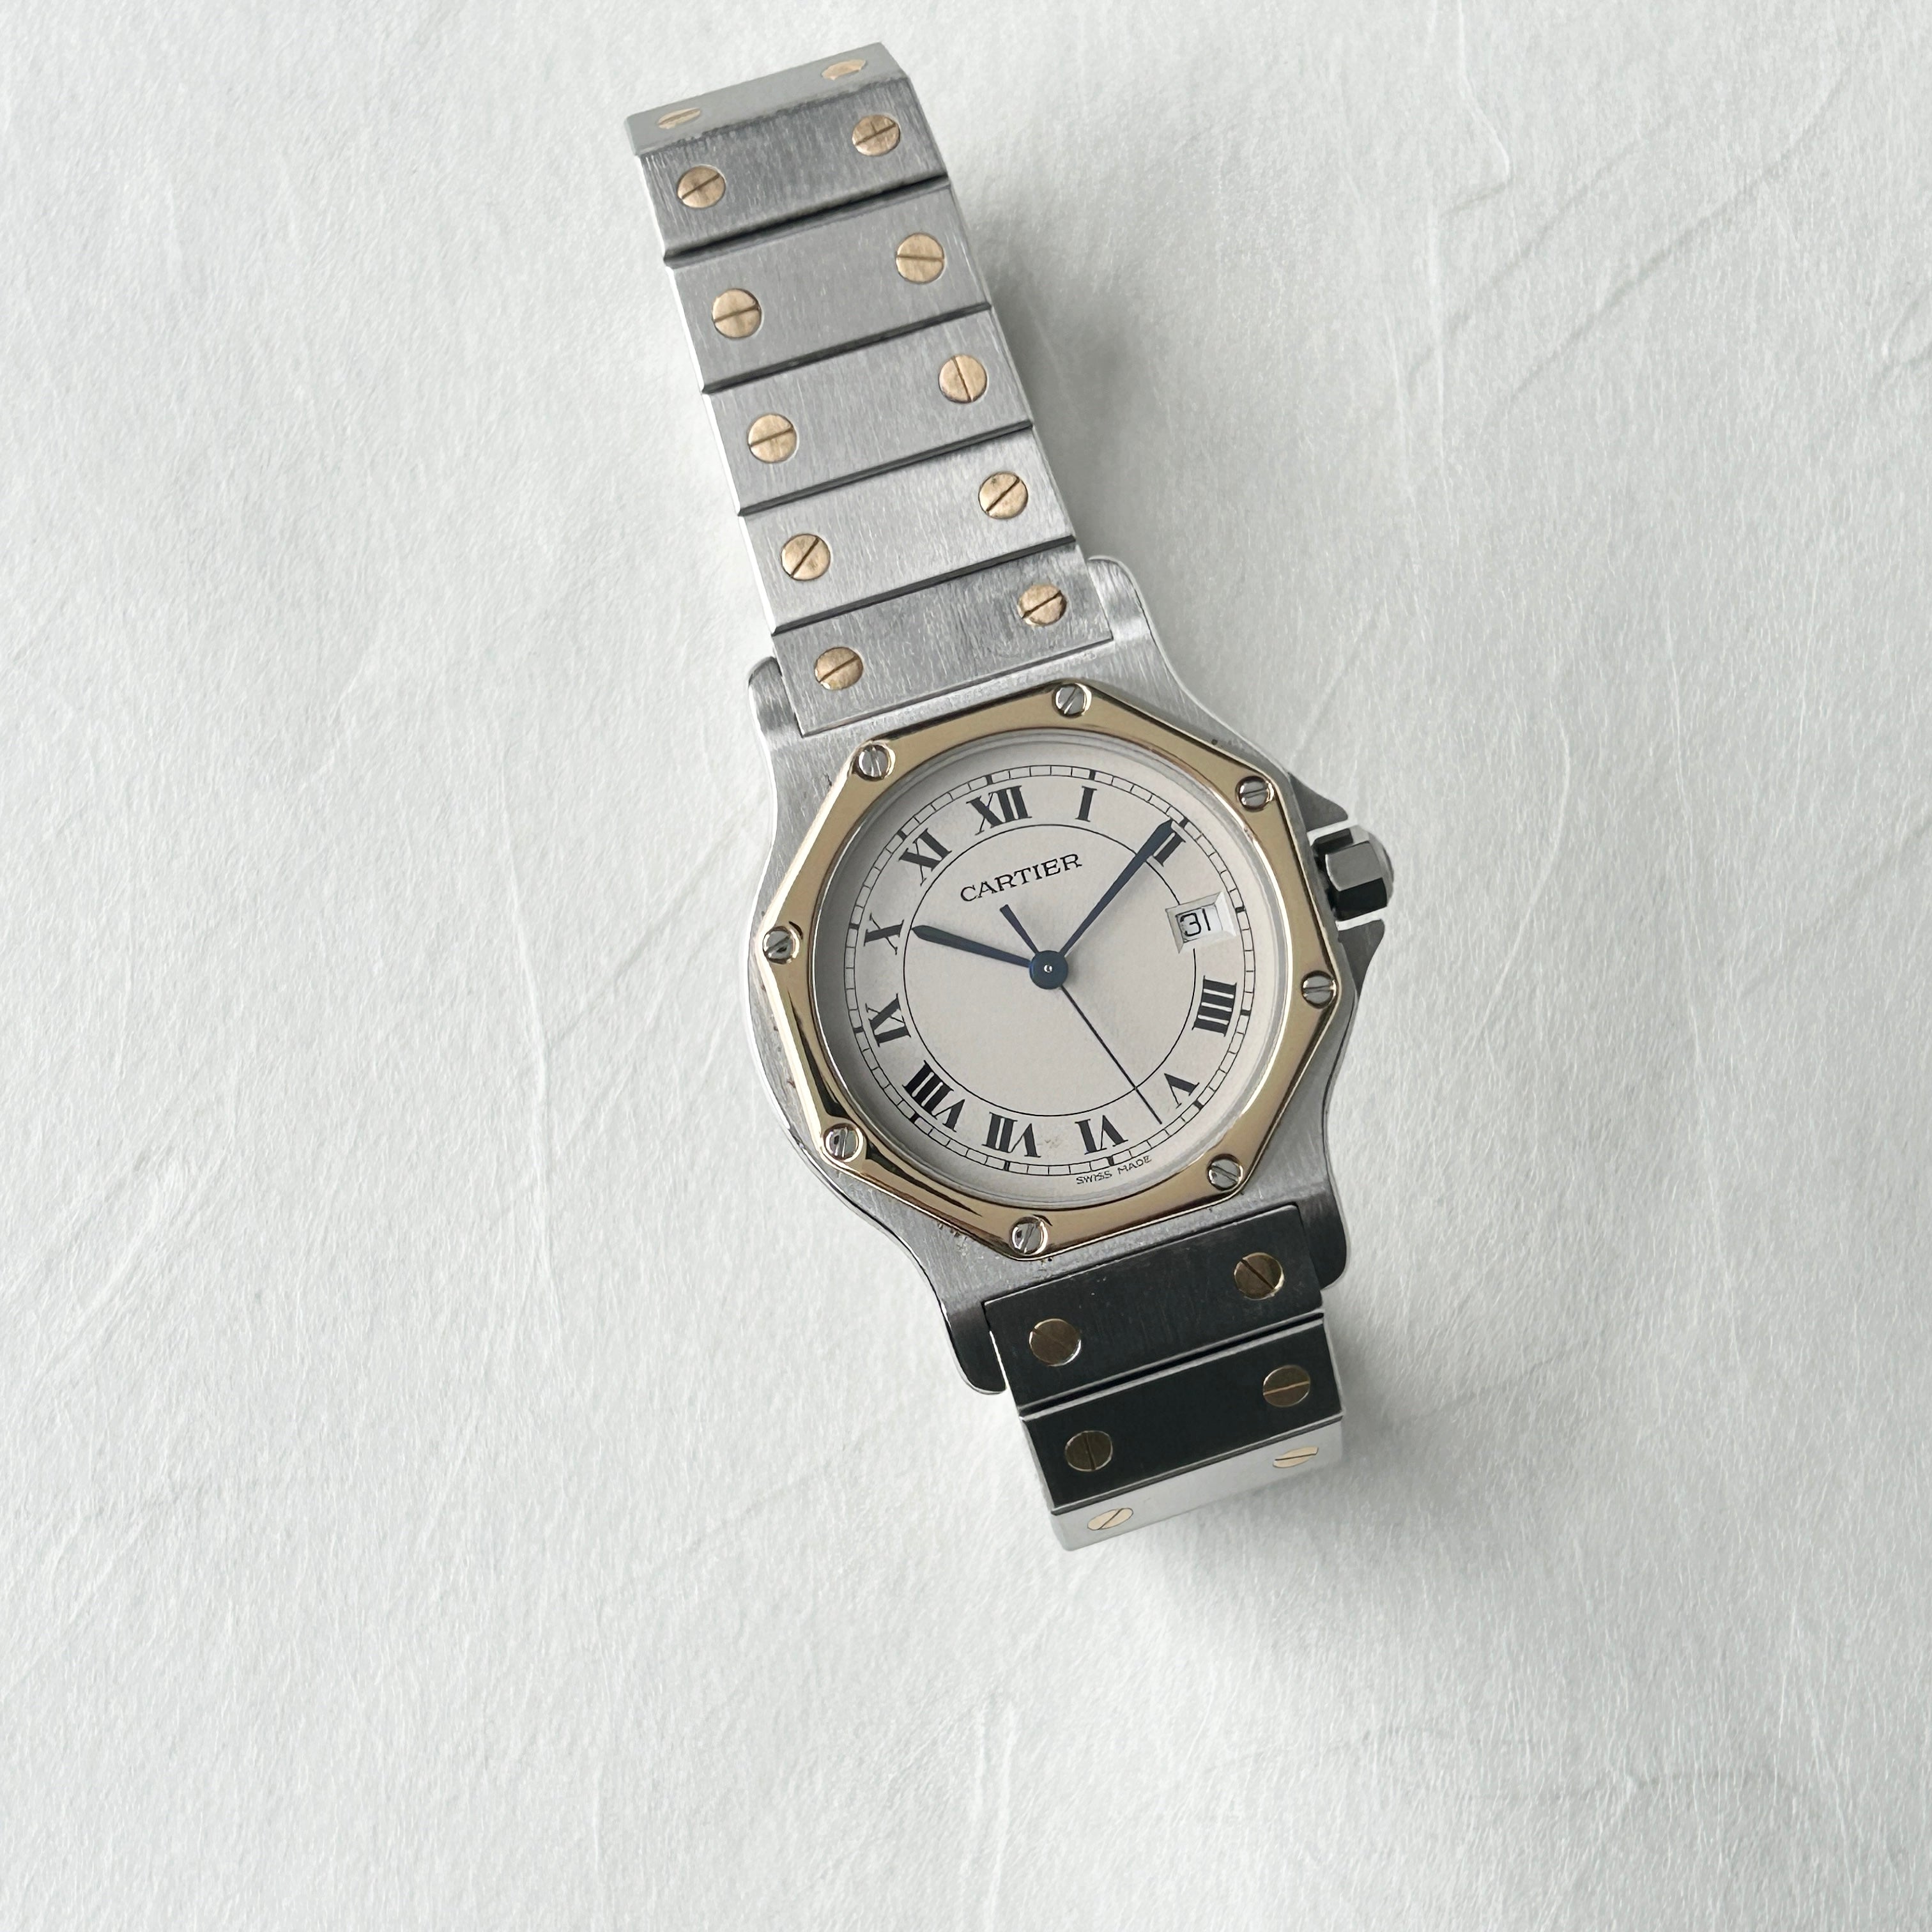 Cartier】サントスオクタゴンLMコンビQuartz – REGALO vintage watch